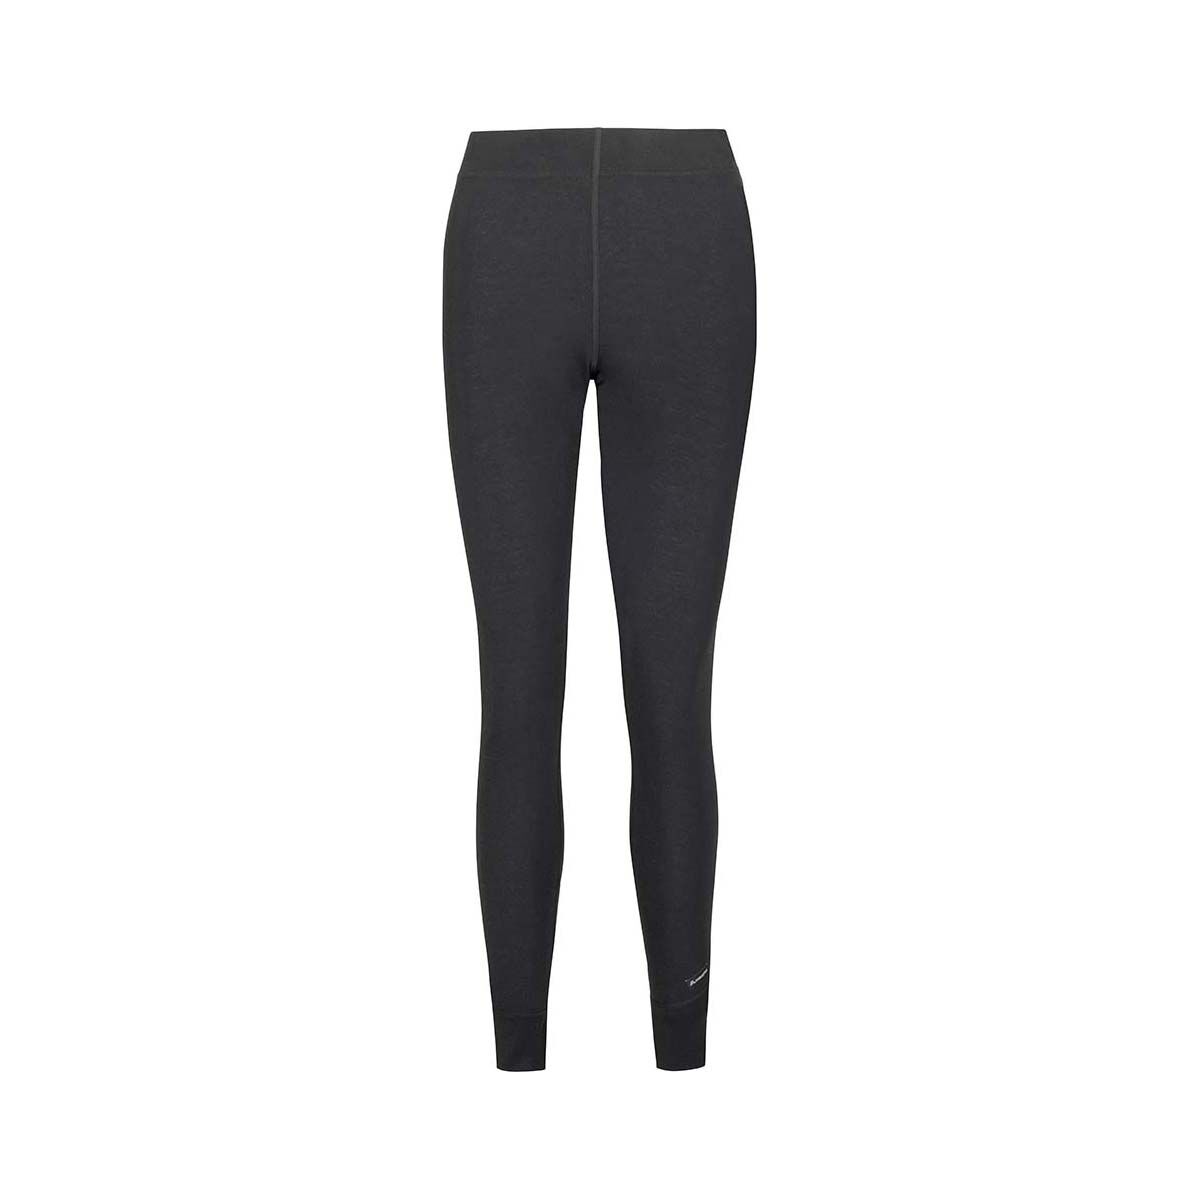 Womens Thermal Clothing For Sale Online Australia